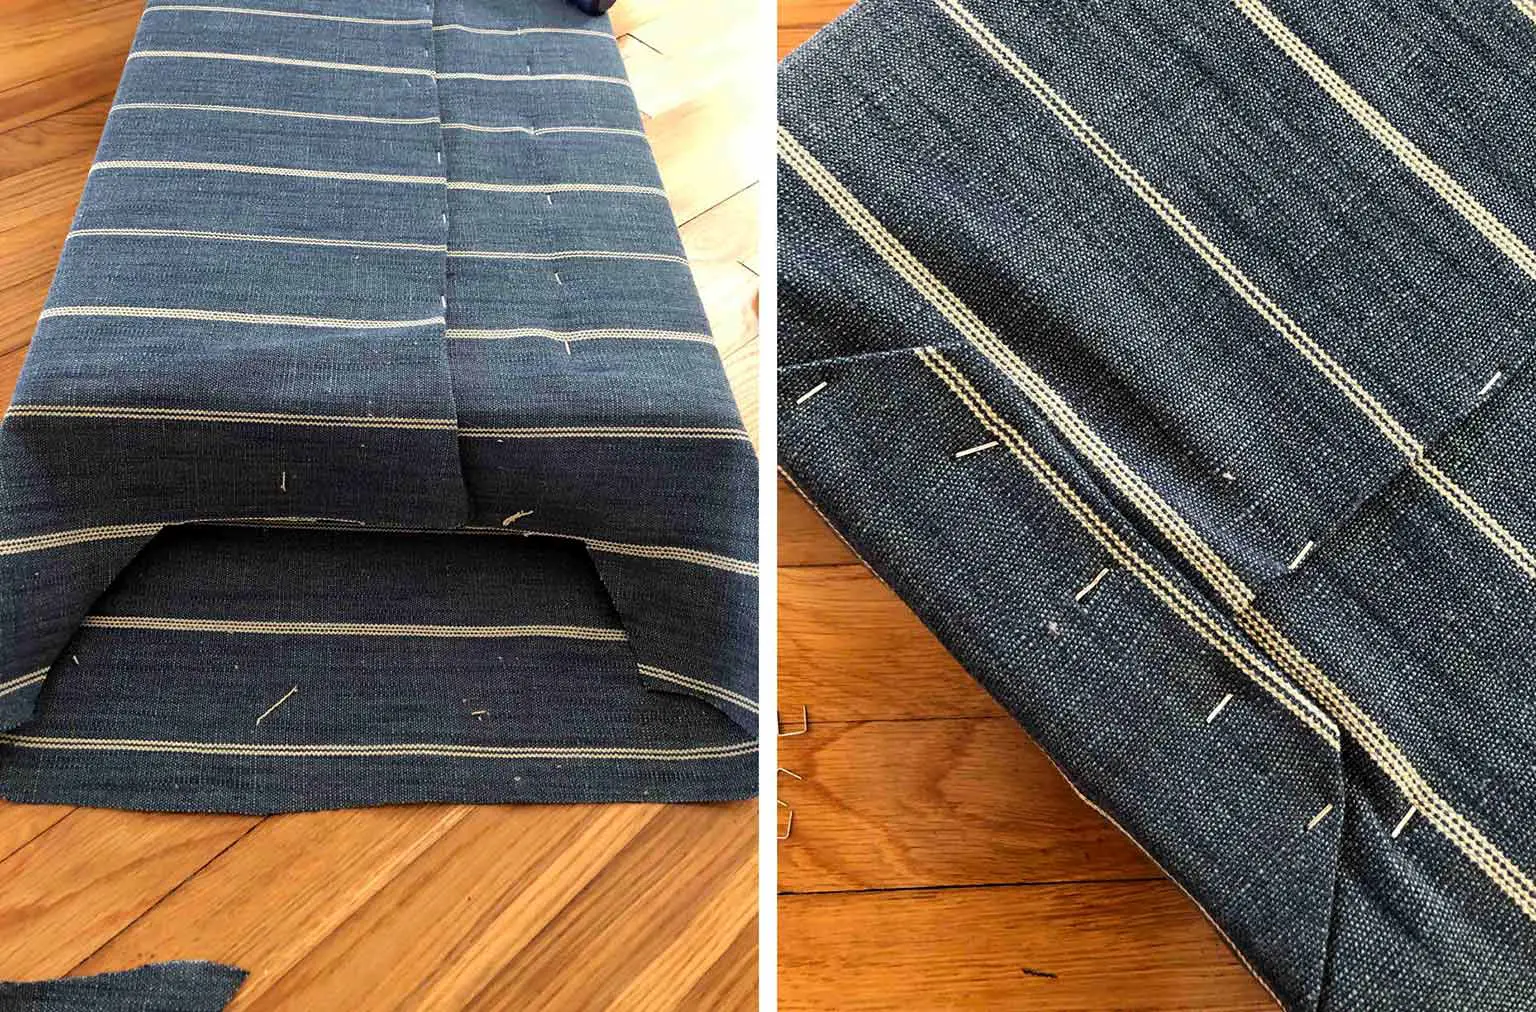 upholstering a bench cushion